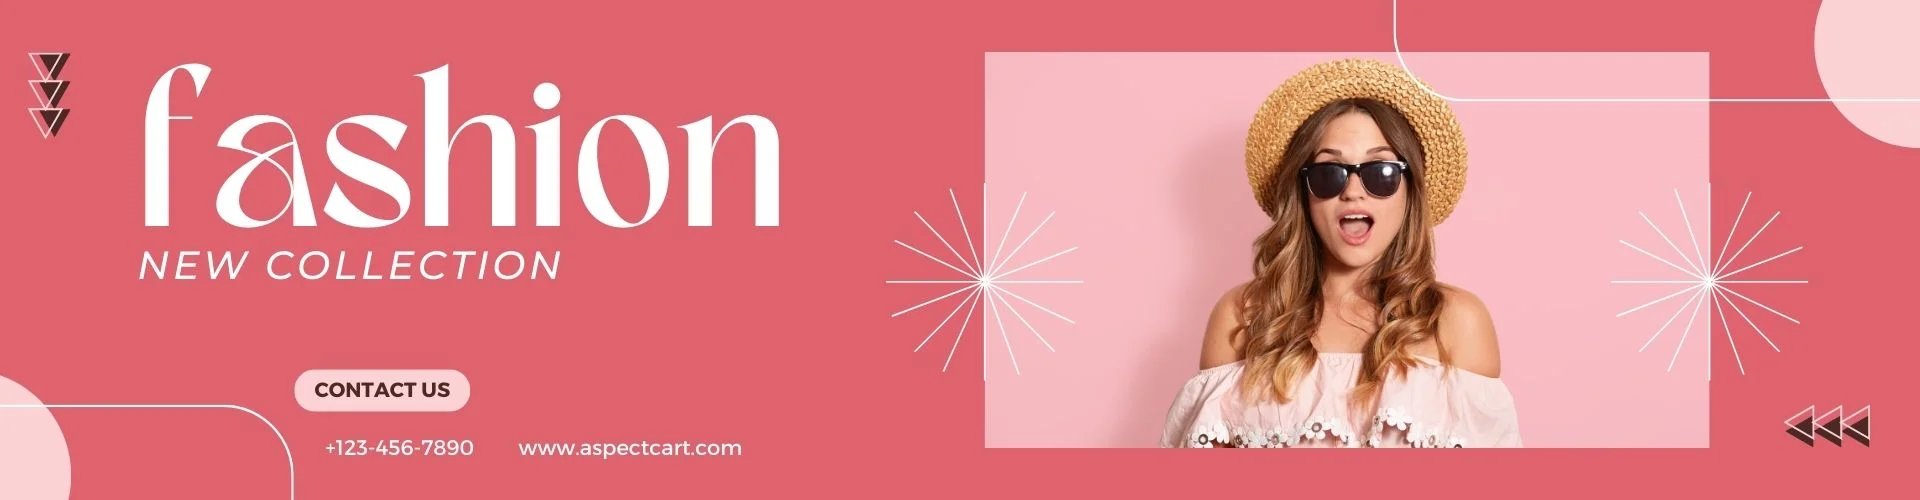 Banner showcasing the latest women's fashion trends at a Fashion E-shop